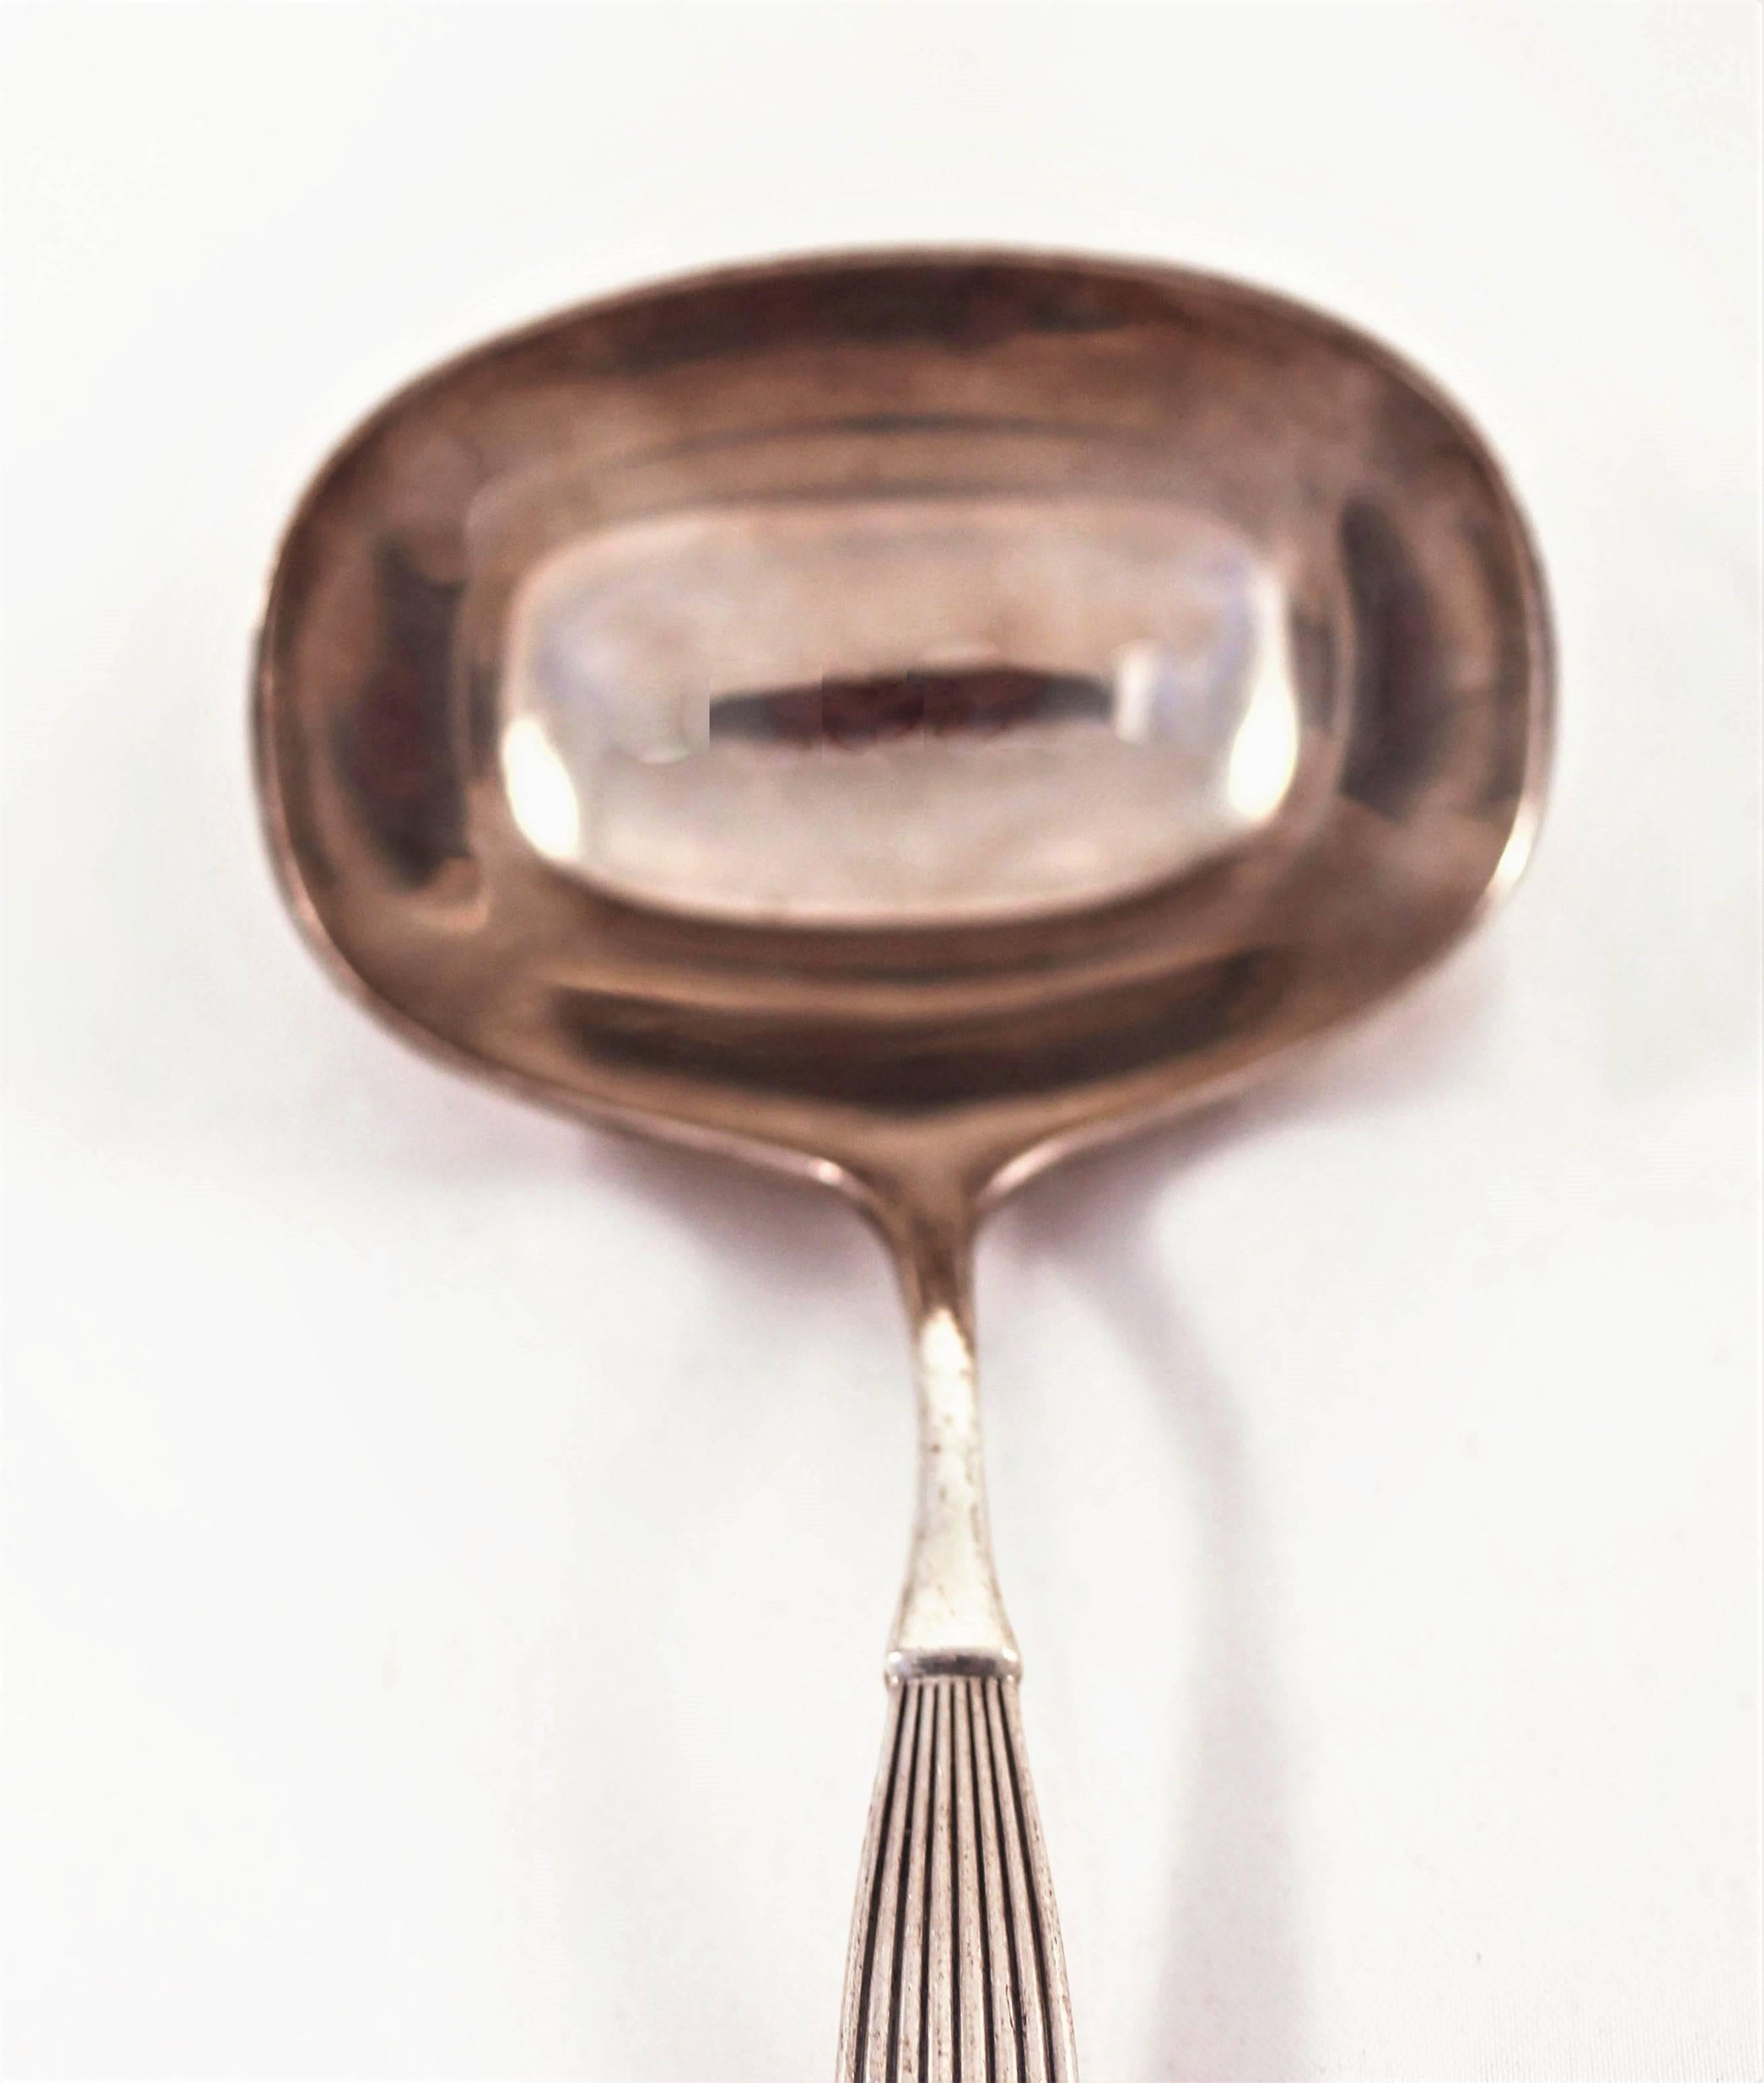 Frigast was a renowned Danish silver manufacturer. Here we have a lovely midcentury gravy ladle with ridges along the handle. It has that understated Scandinavian chicness that was so popular in the 1950s and 1960s.